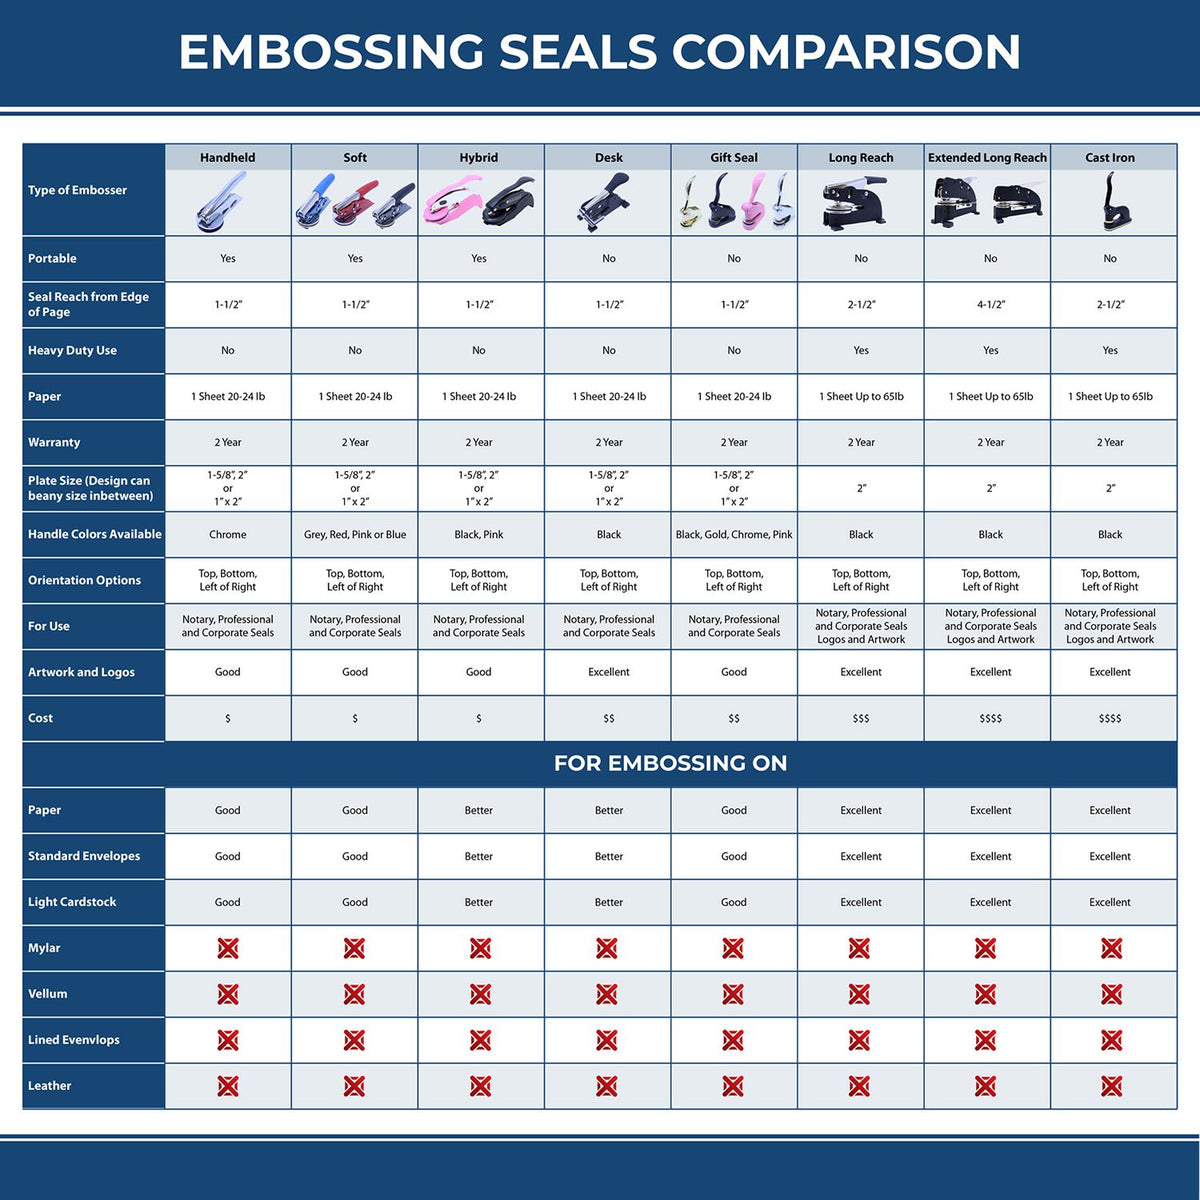 A comparison chart for the different types of mount models available for the Heavy Duty Cast Iron Connecticut Architect Embosser.